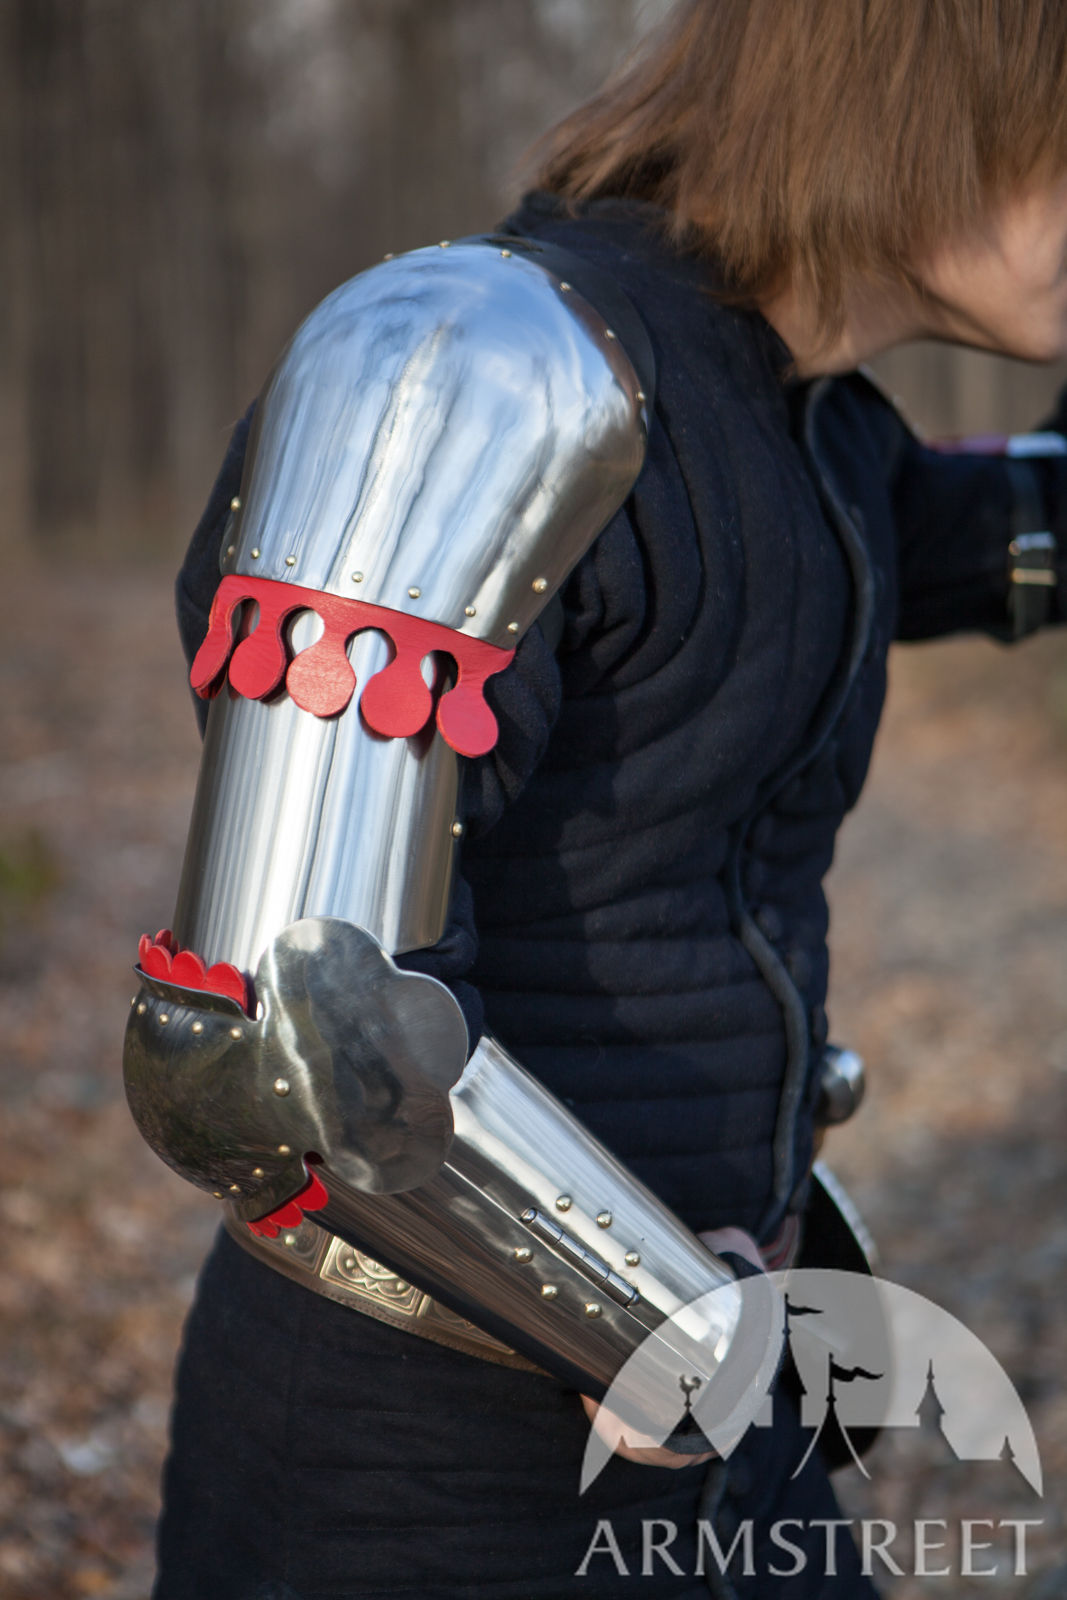 Wester Combat Arms: Stainless steel SCA armor